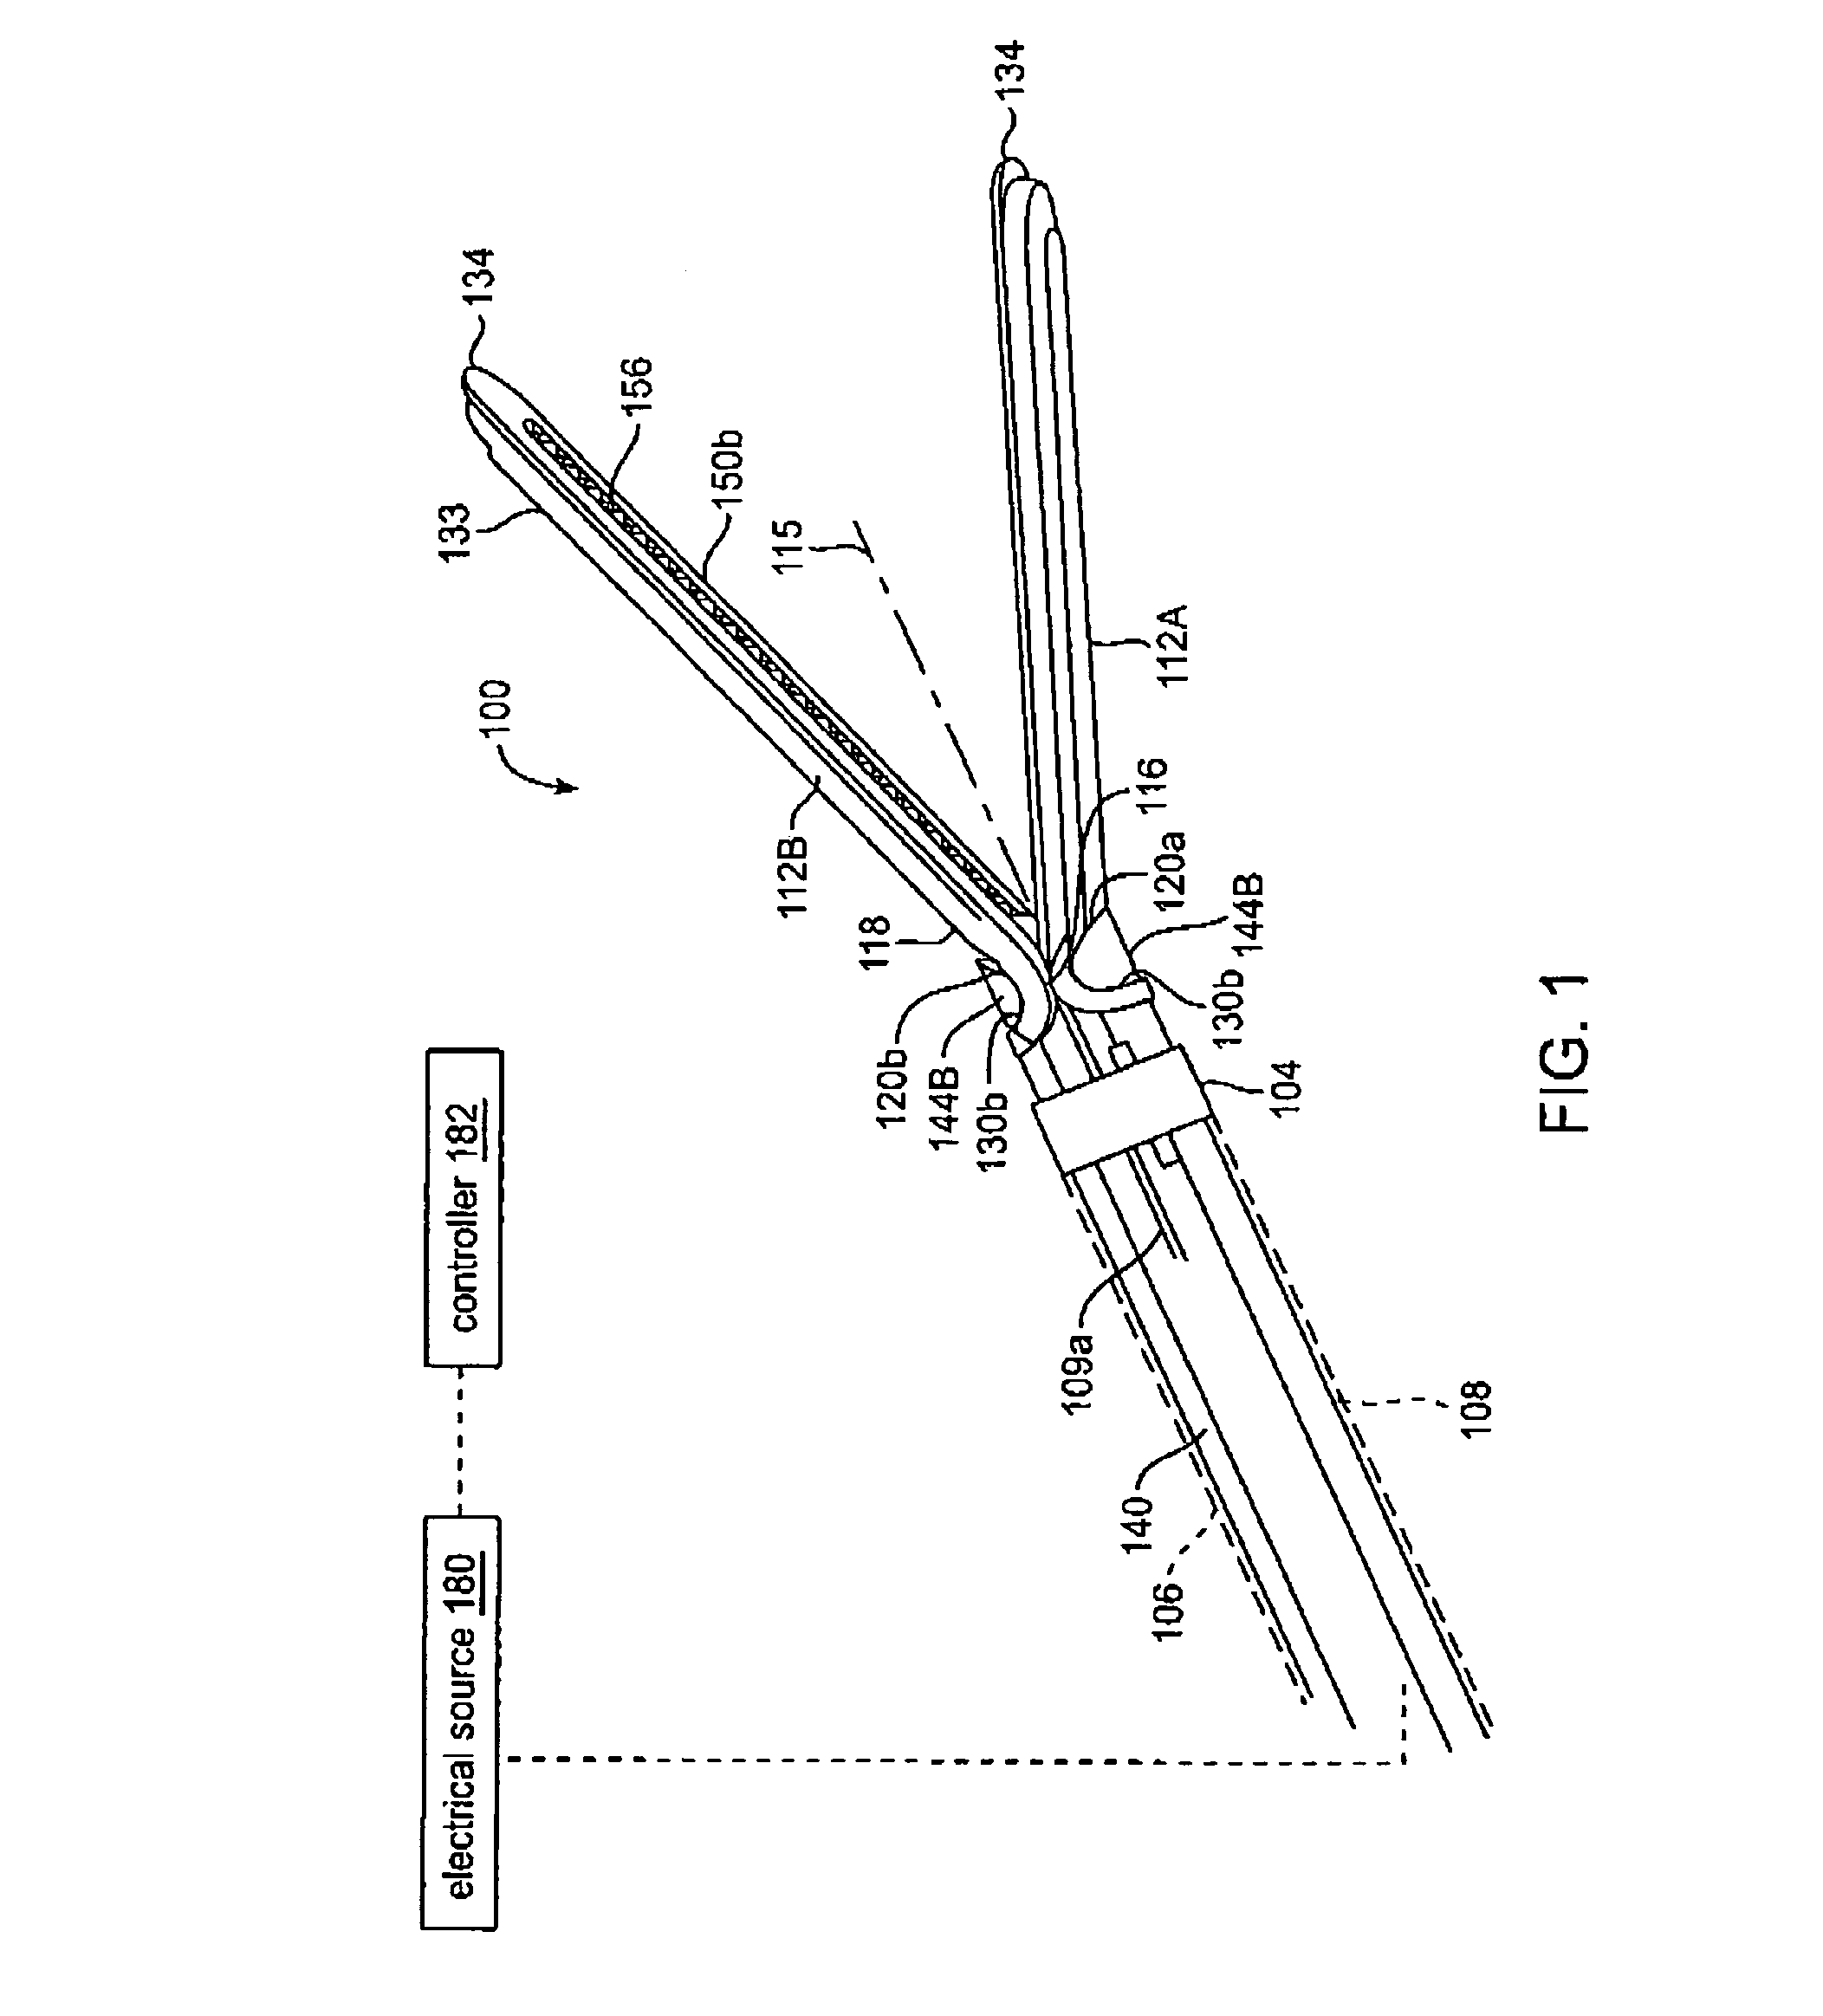 Jaw structure for electrosurgical instrument and method of use